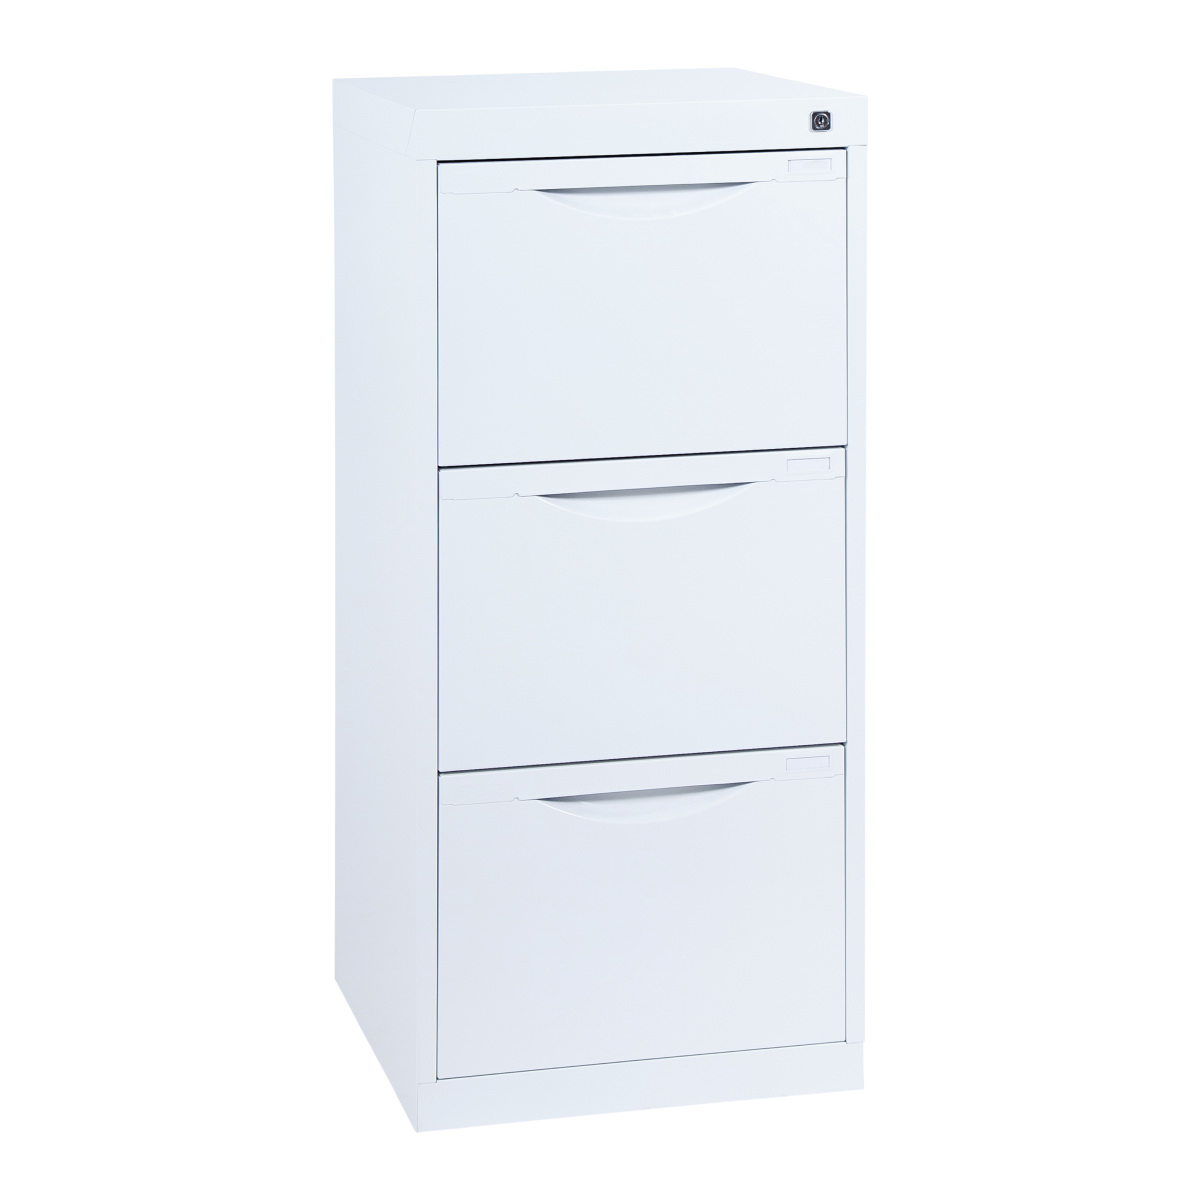 3 Drawer Statewide Compact Filing Cabinet Endo within size 1200 X 1200